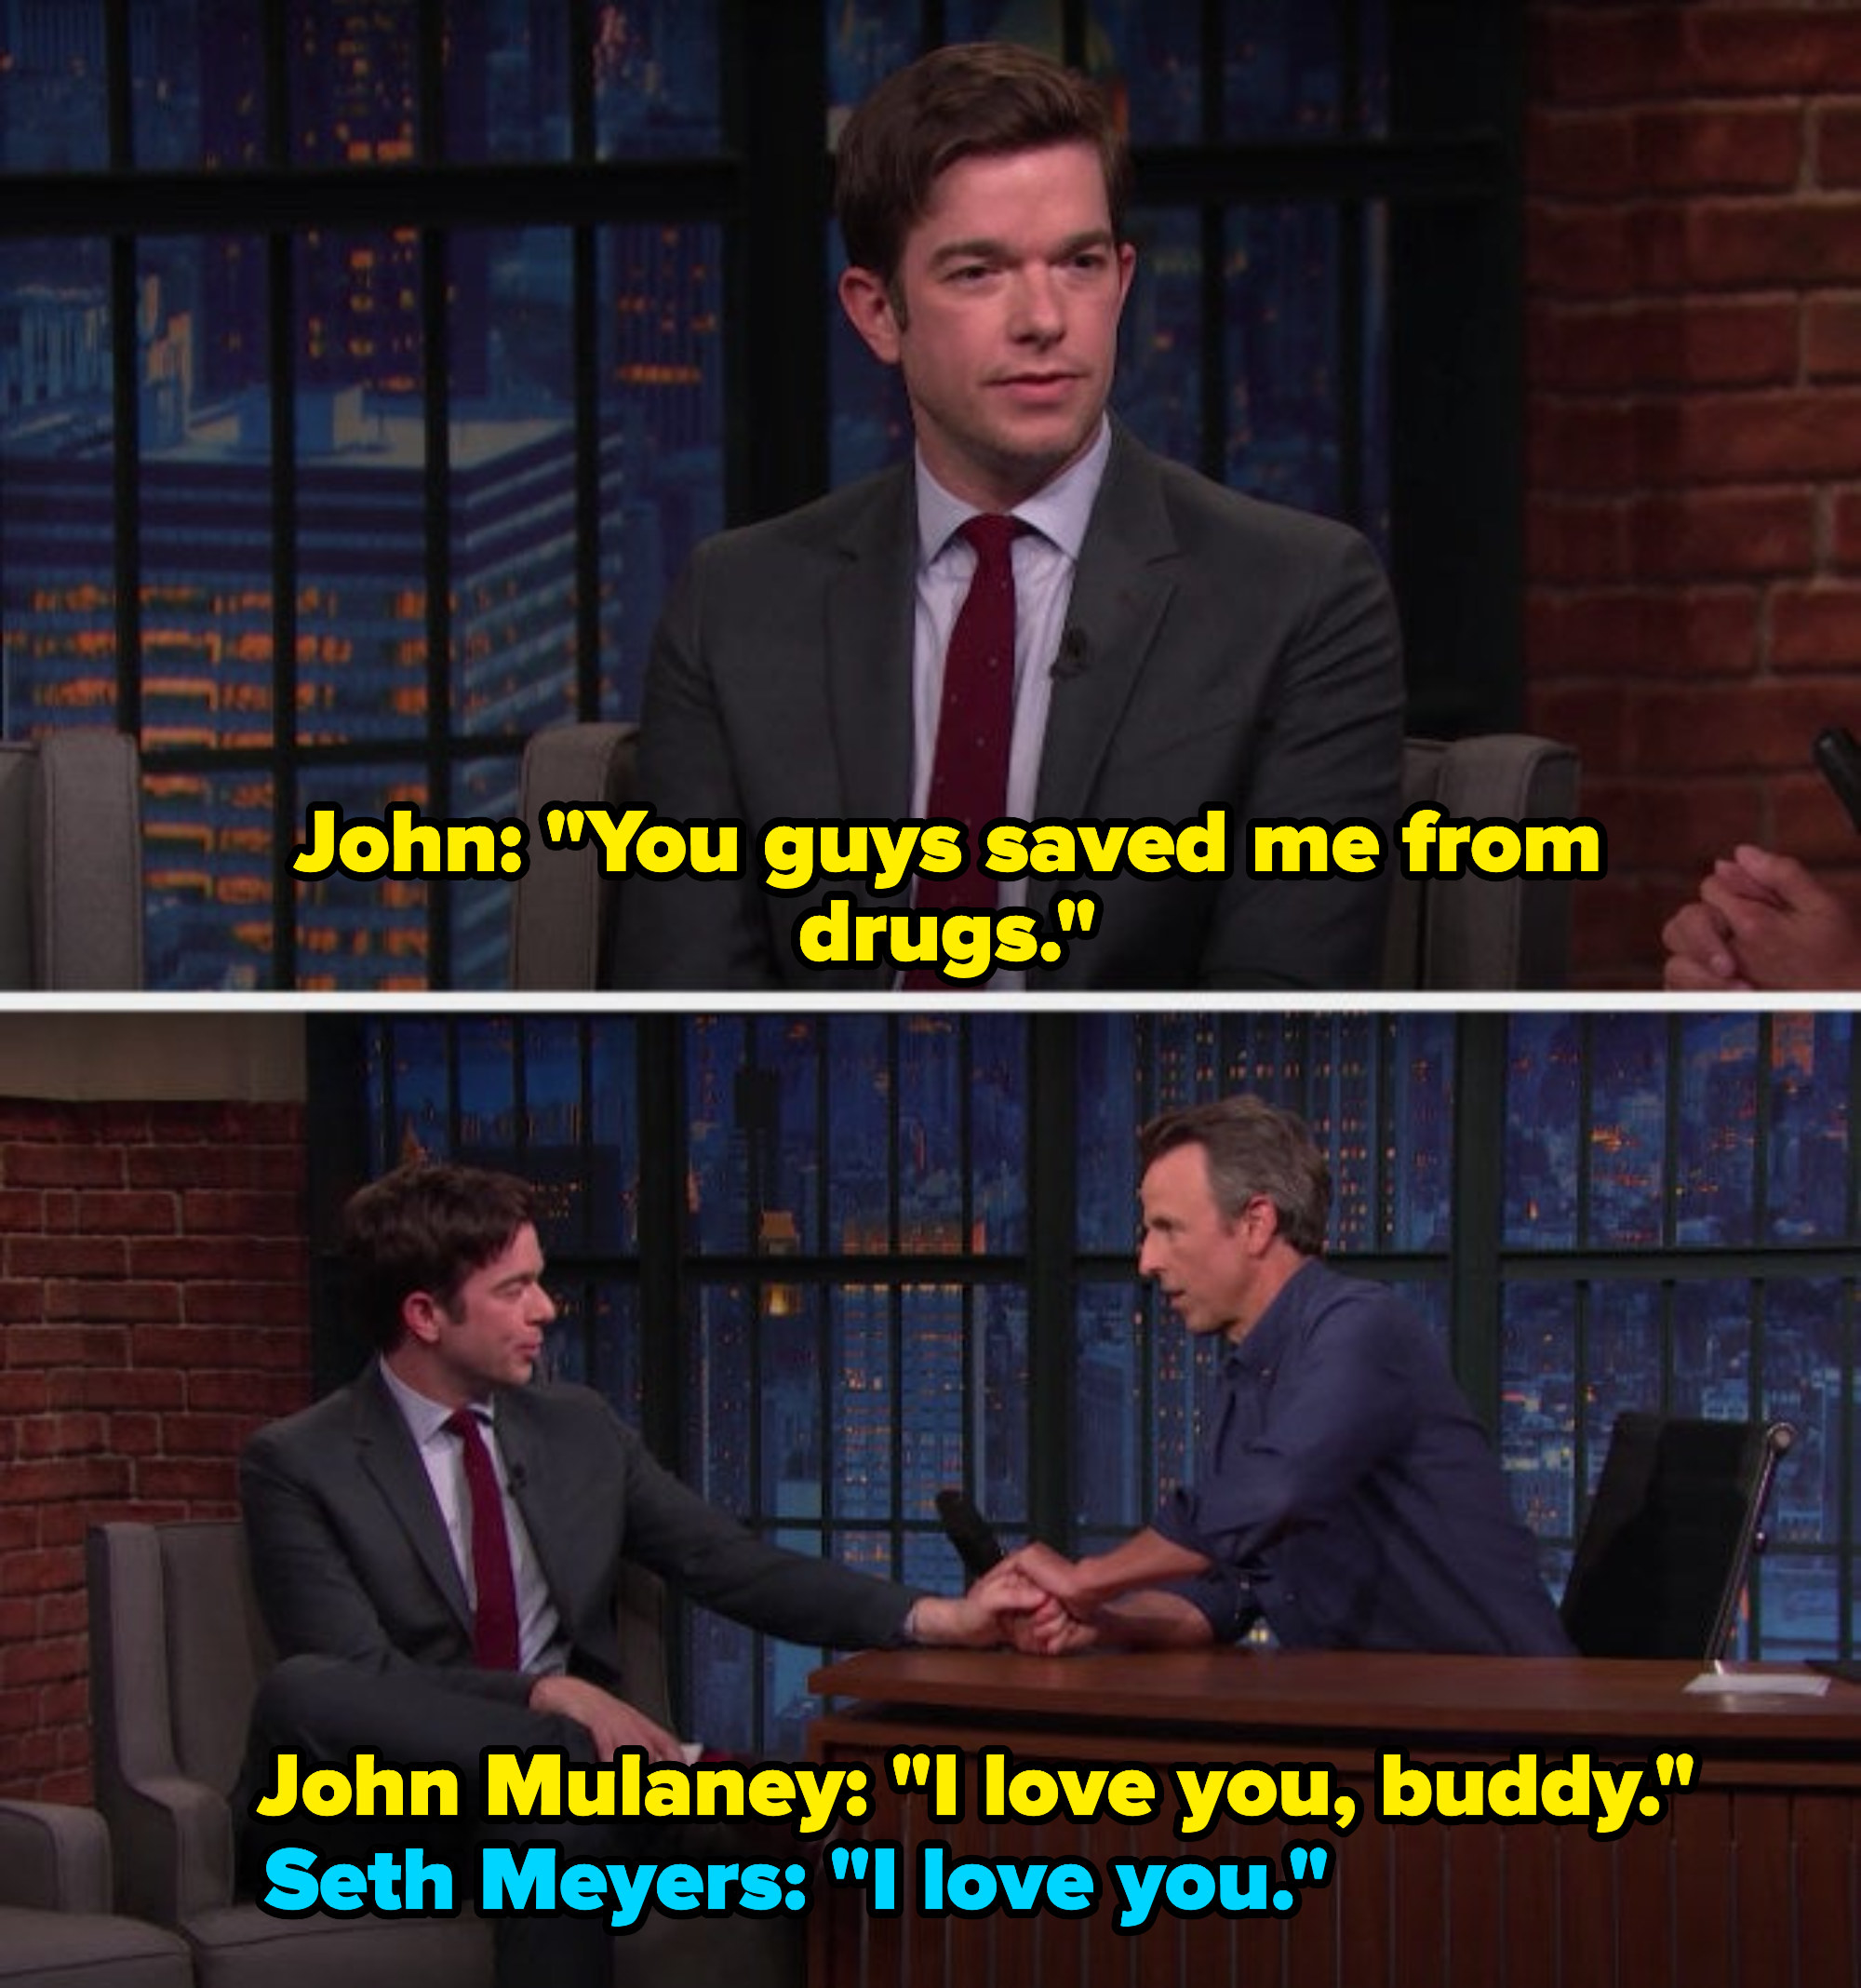 John Mulaney tells Seth Meyers he saved him from drugs and says he loves Seth